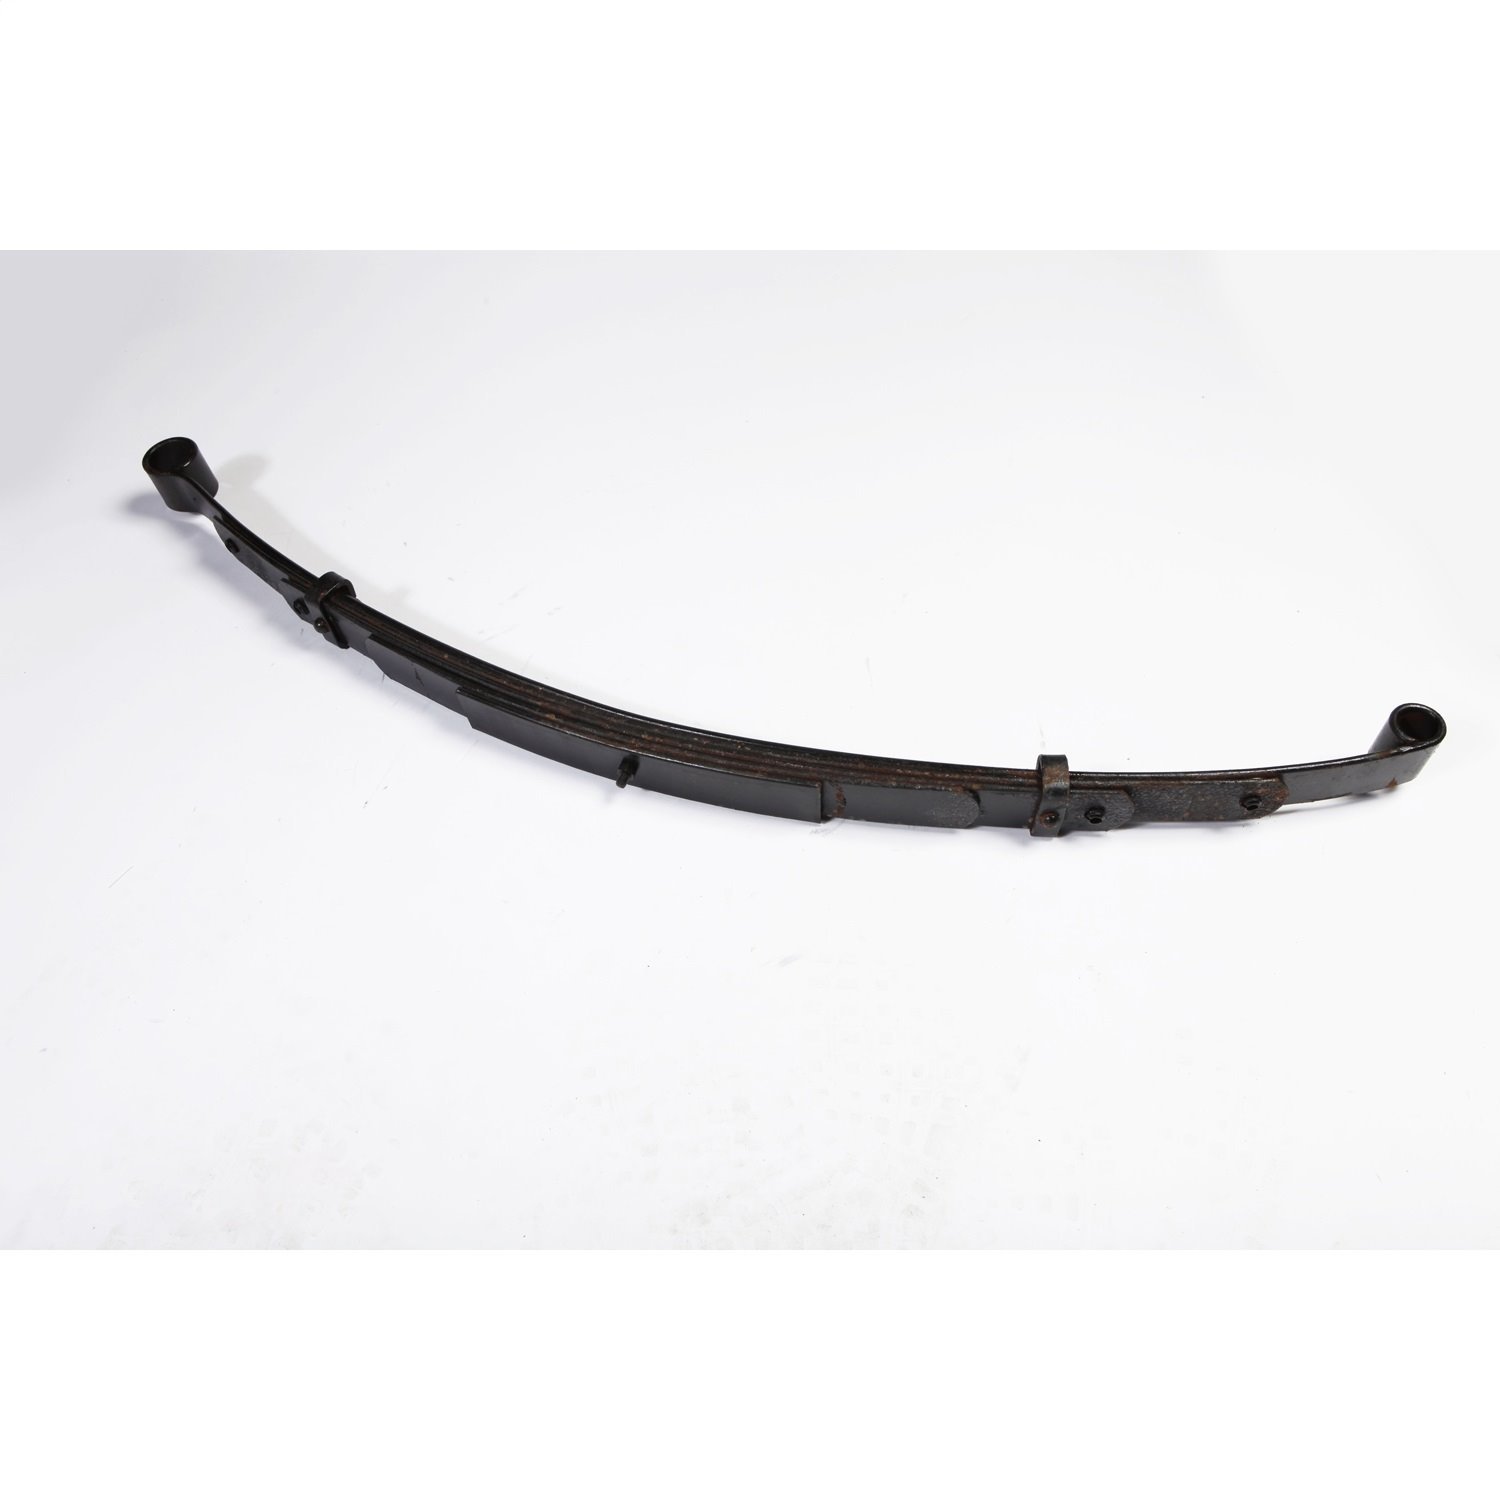 Stock replacement 5 leaf front spring from Omix-ADA, Fits 76-86 Jeep CJ7 and 81-86 CJ8 Left or right side.